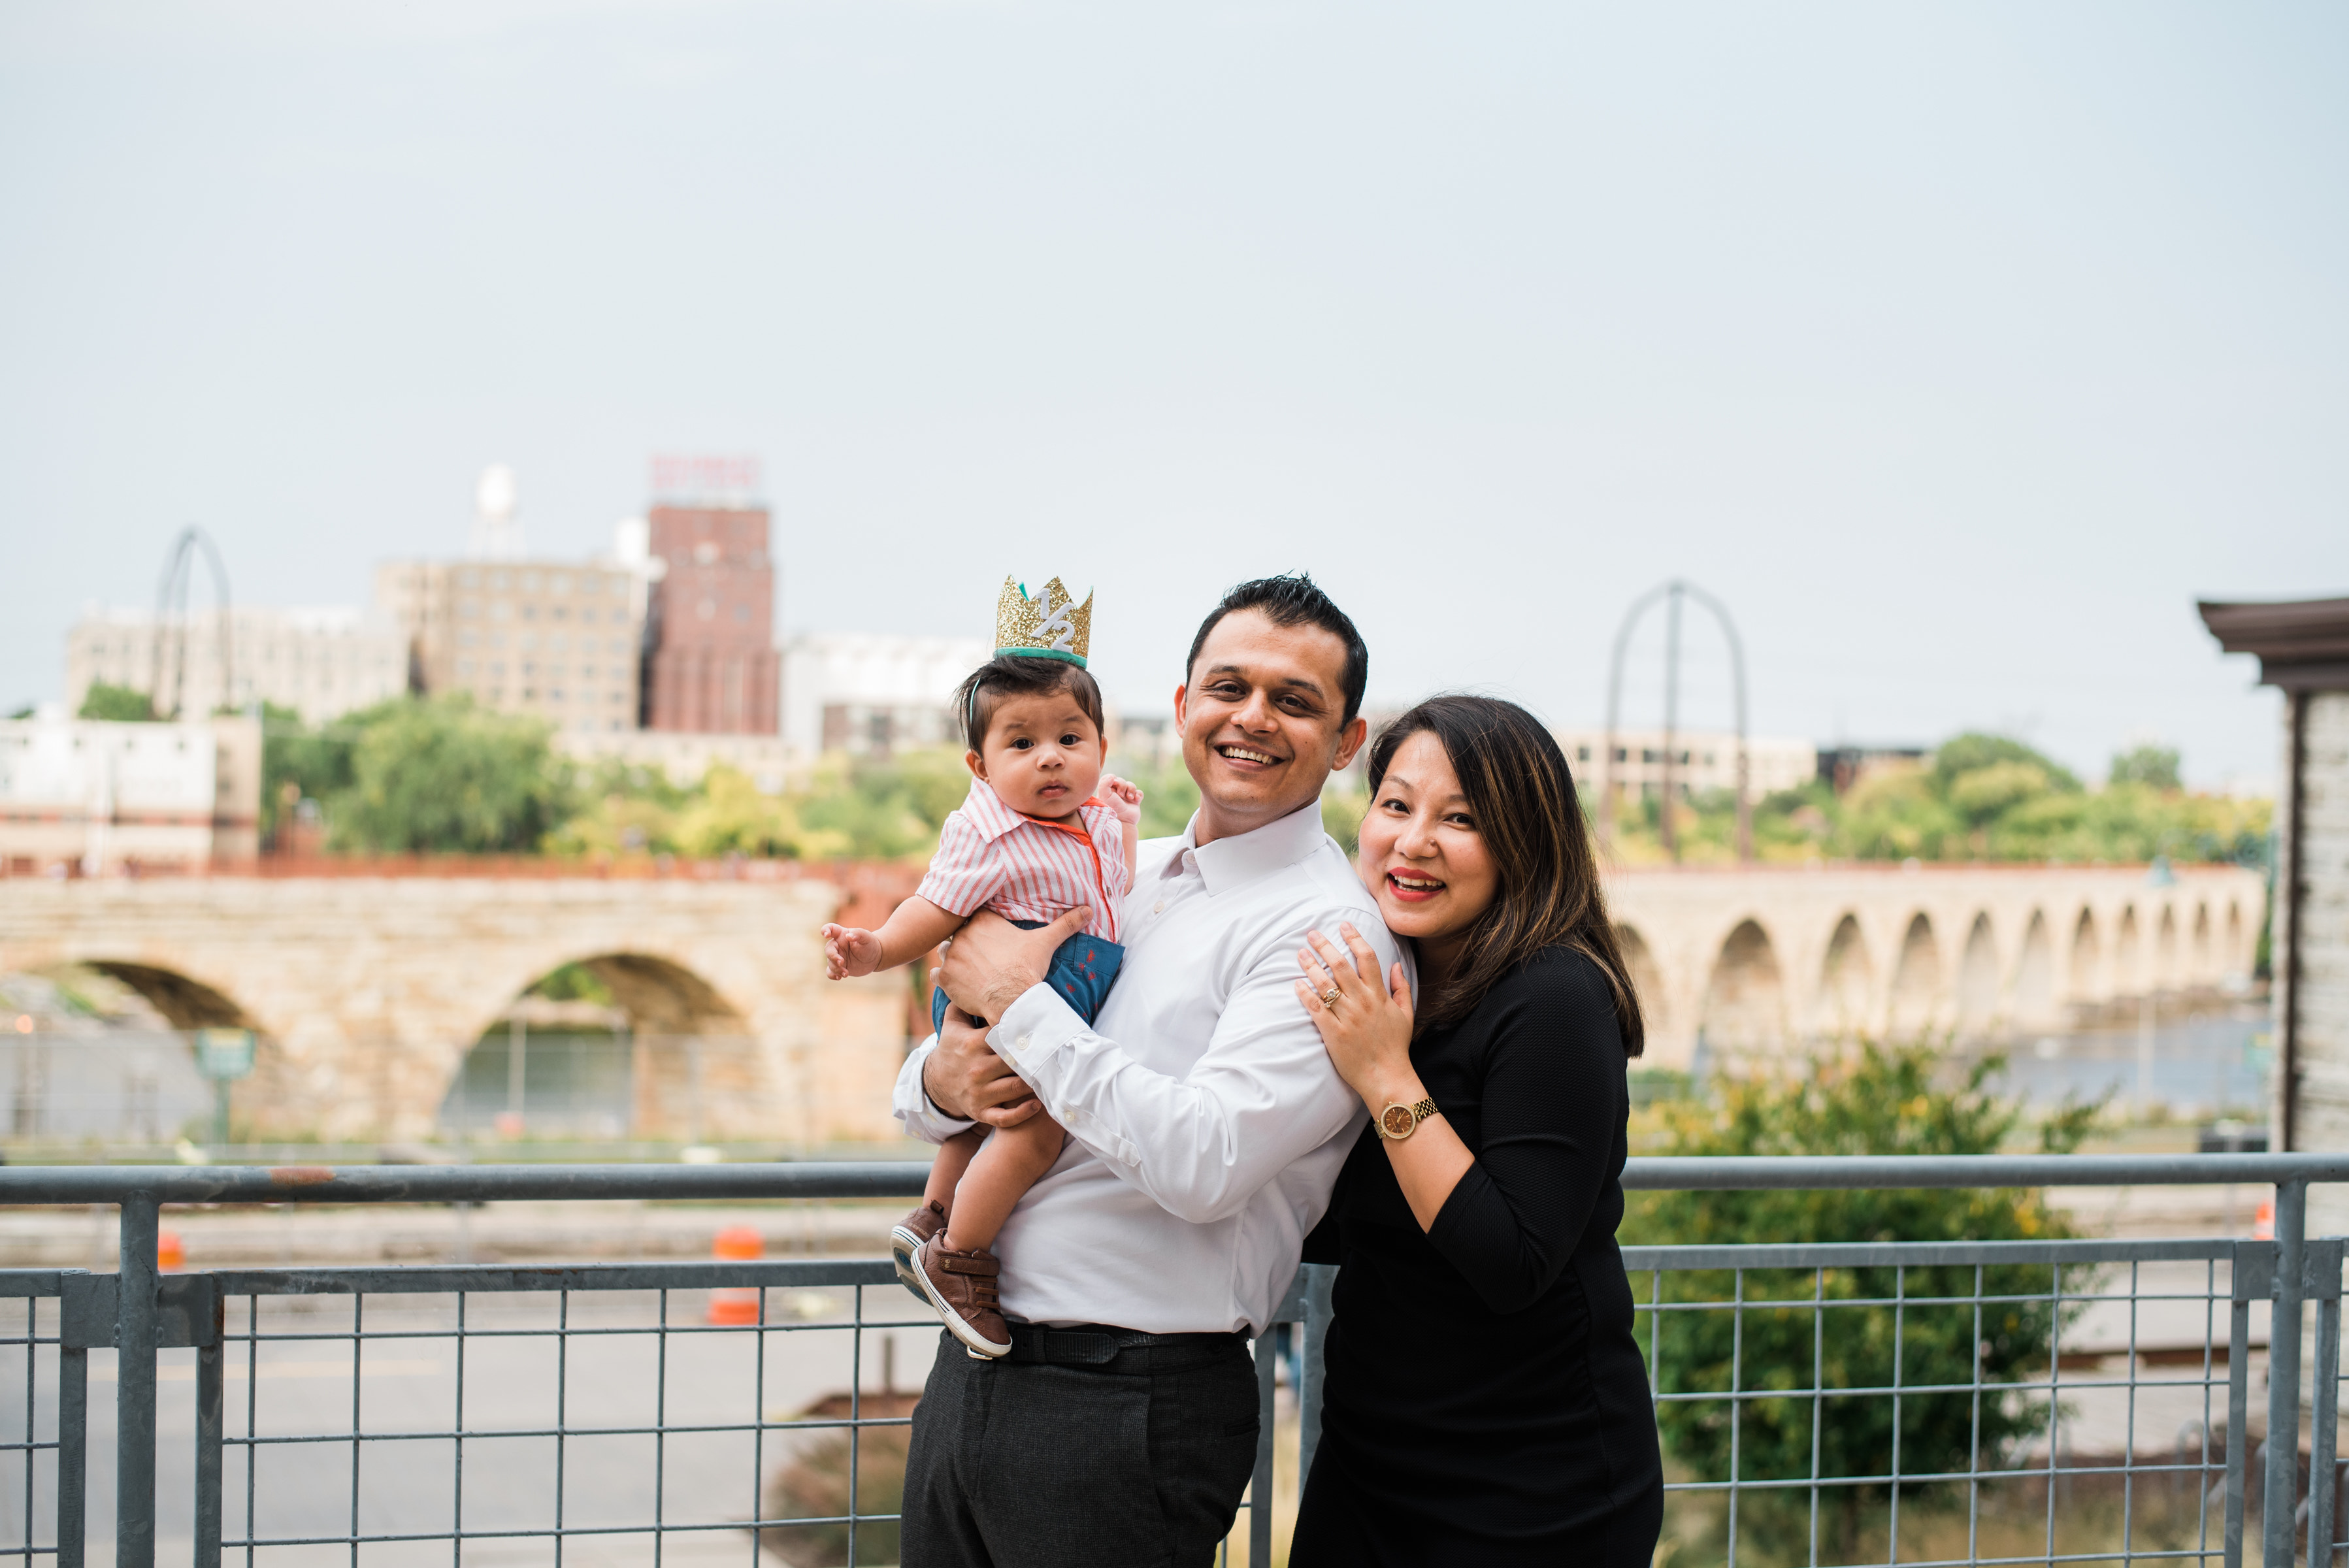 PMR resident Dr. Akhil Shori with his wife and child.